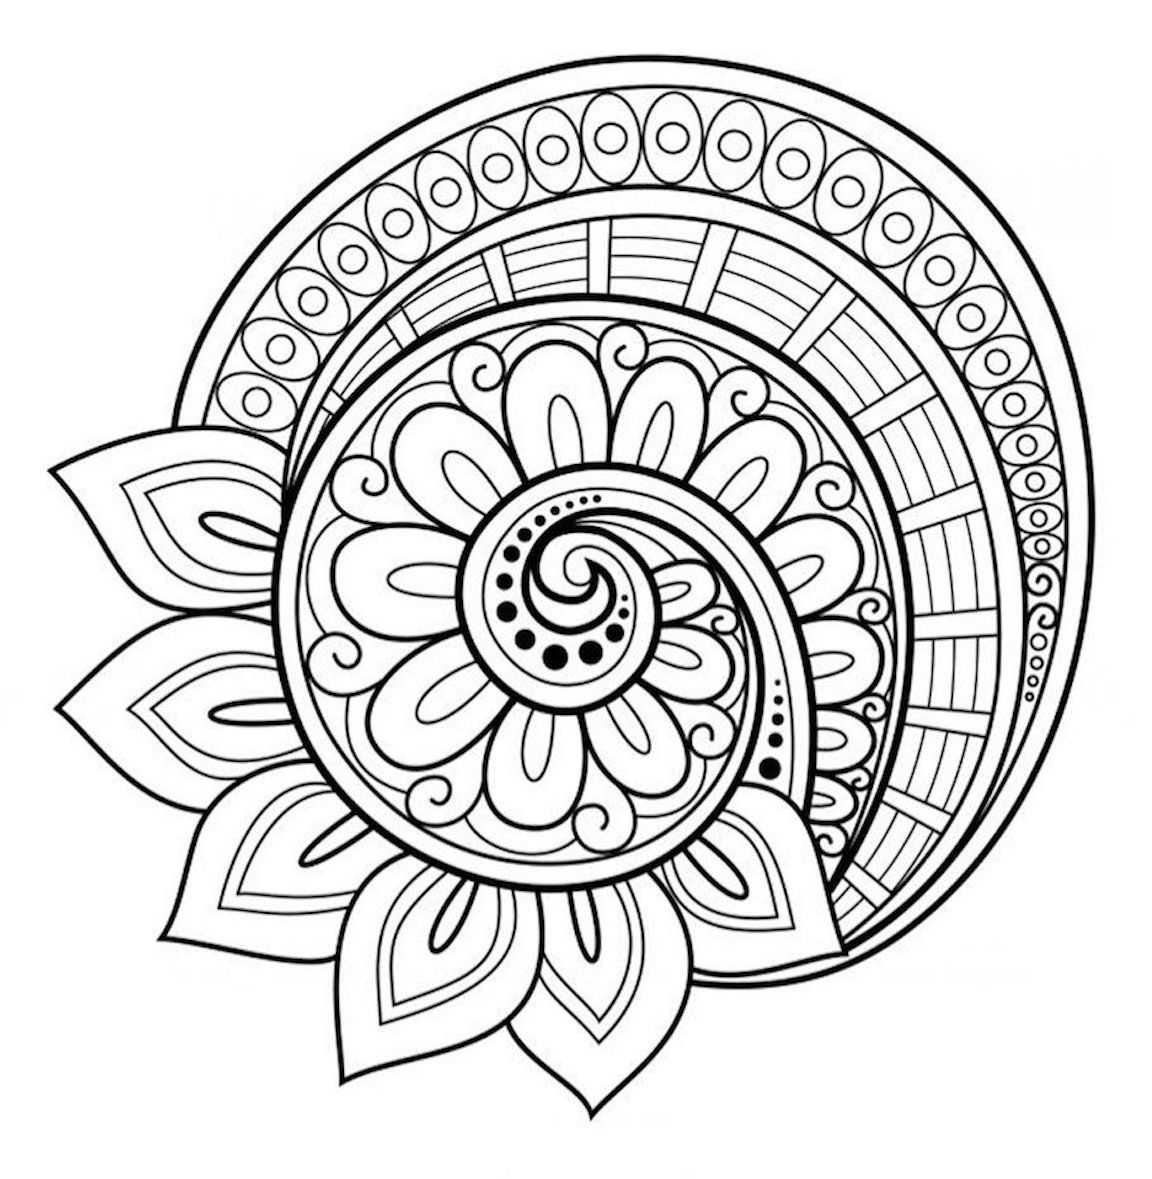 Mandala Coloring Pages And Dozens More Free Printable Coloring Themes